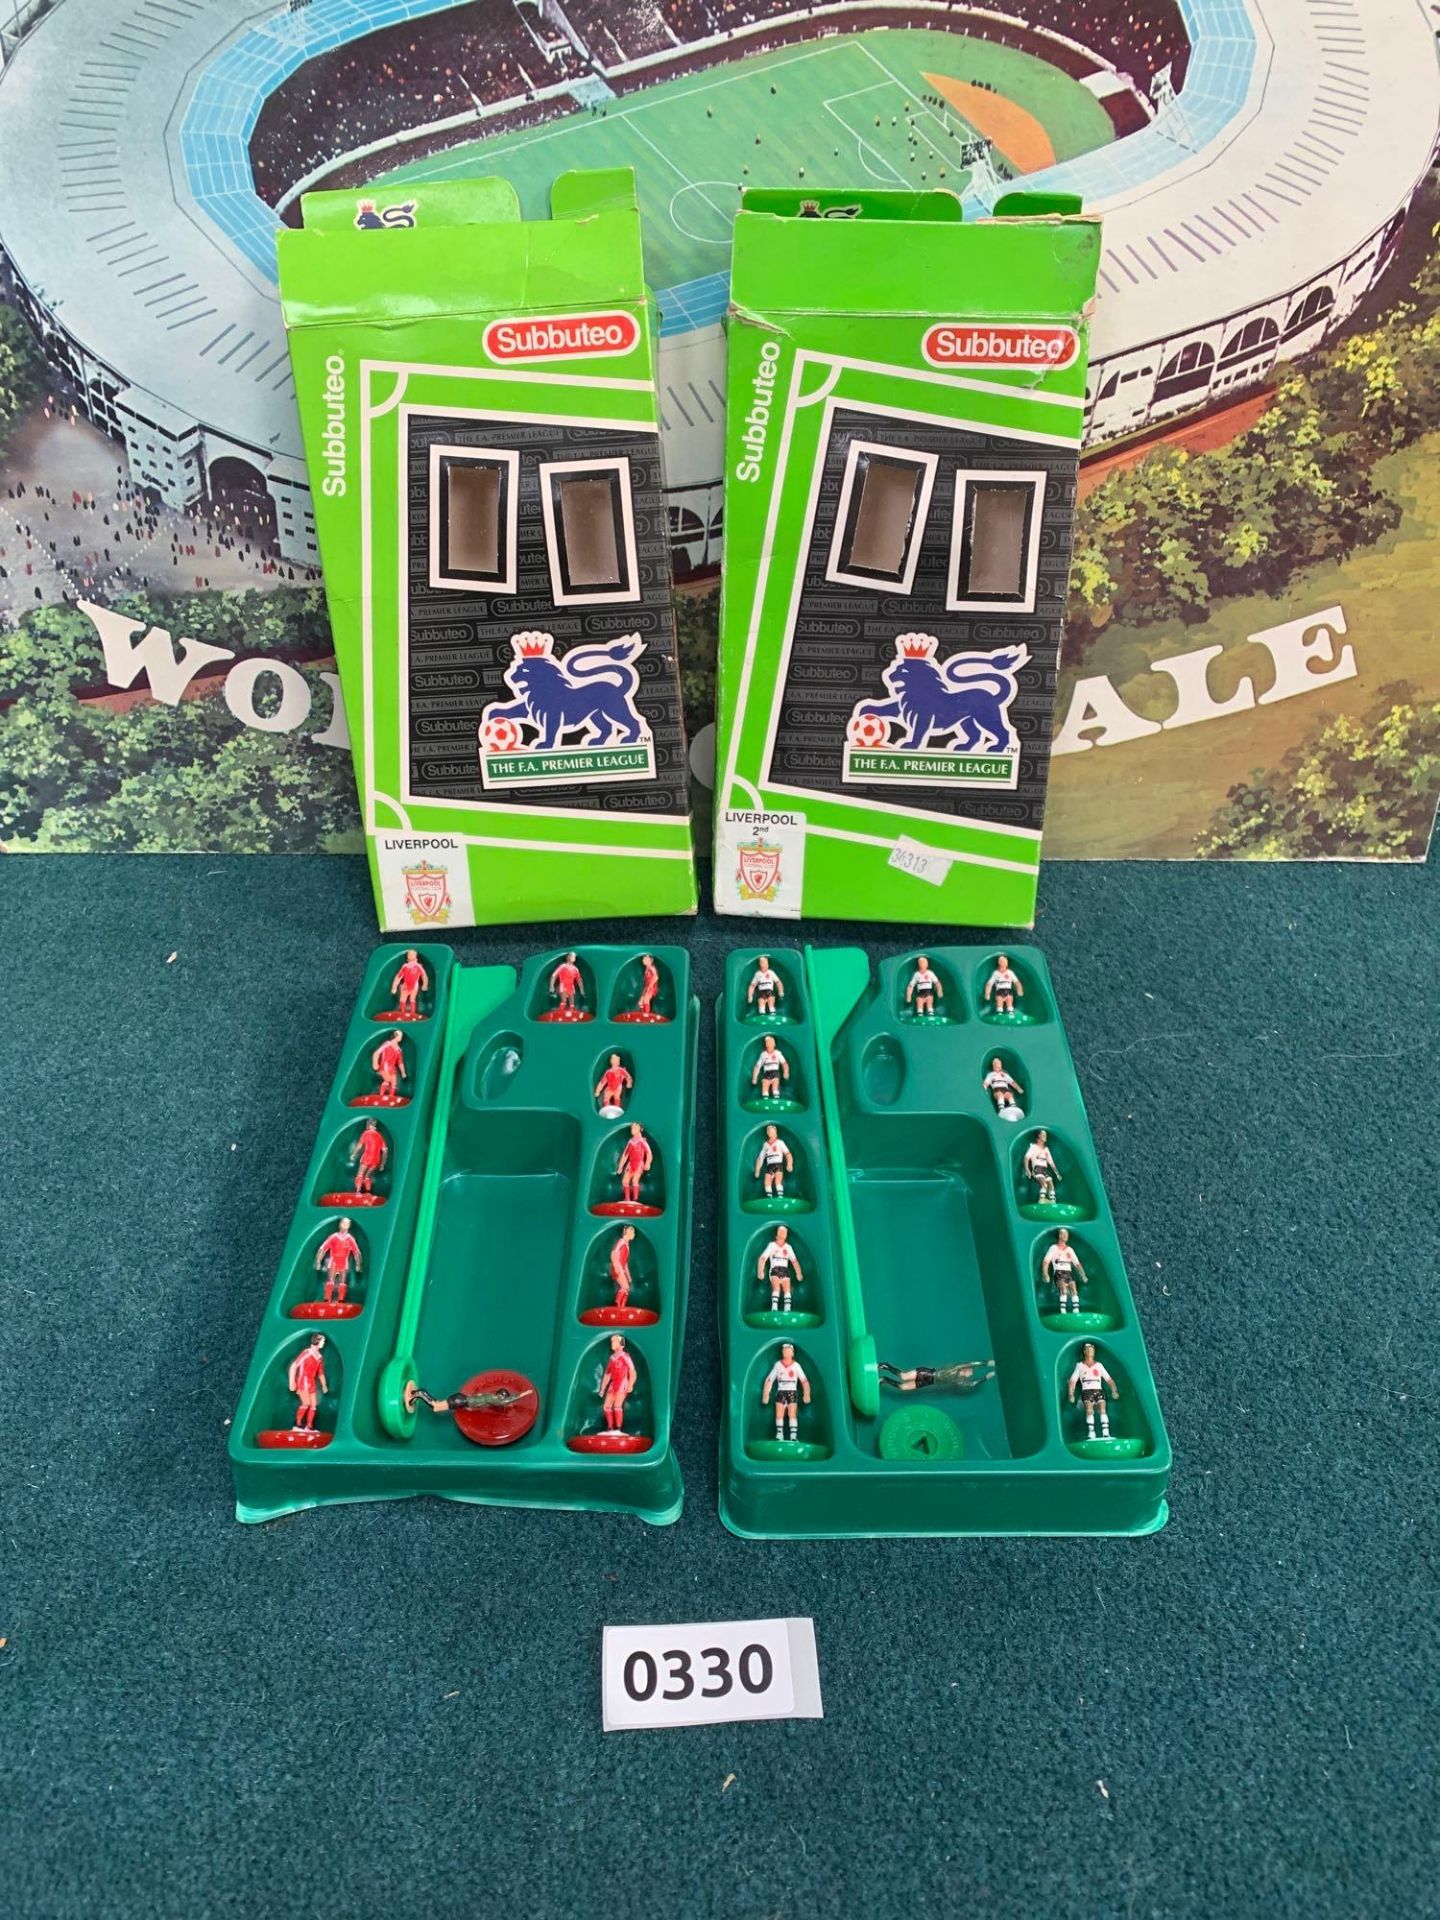 Subbuteo Liverpool Team Kits Includes Ref.63741 Premier League Team Liverpool 1996 Home Kit And